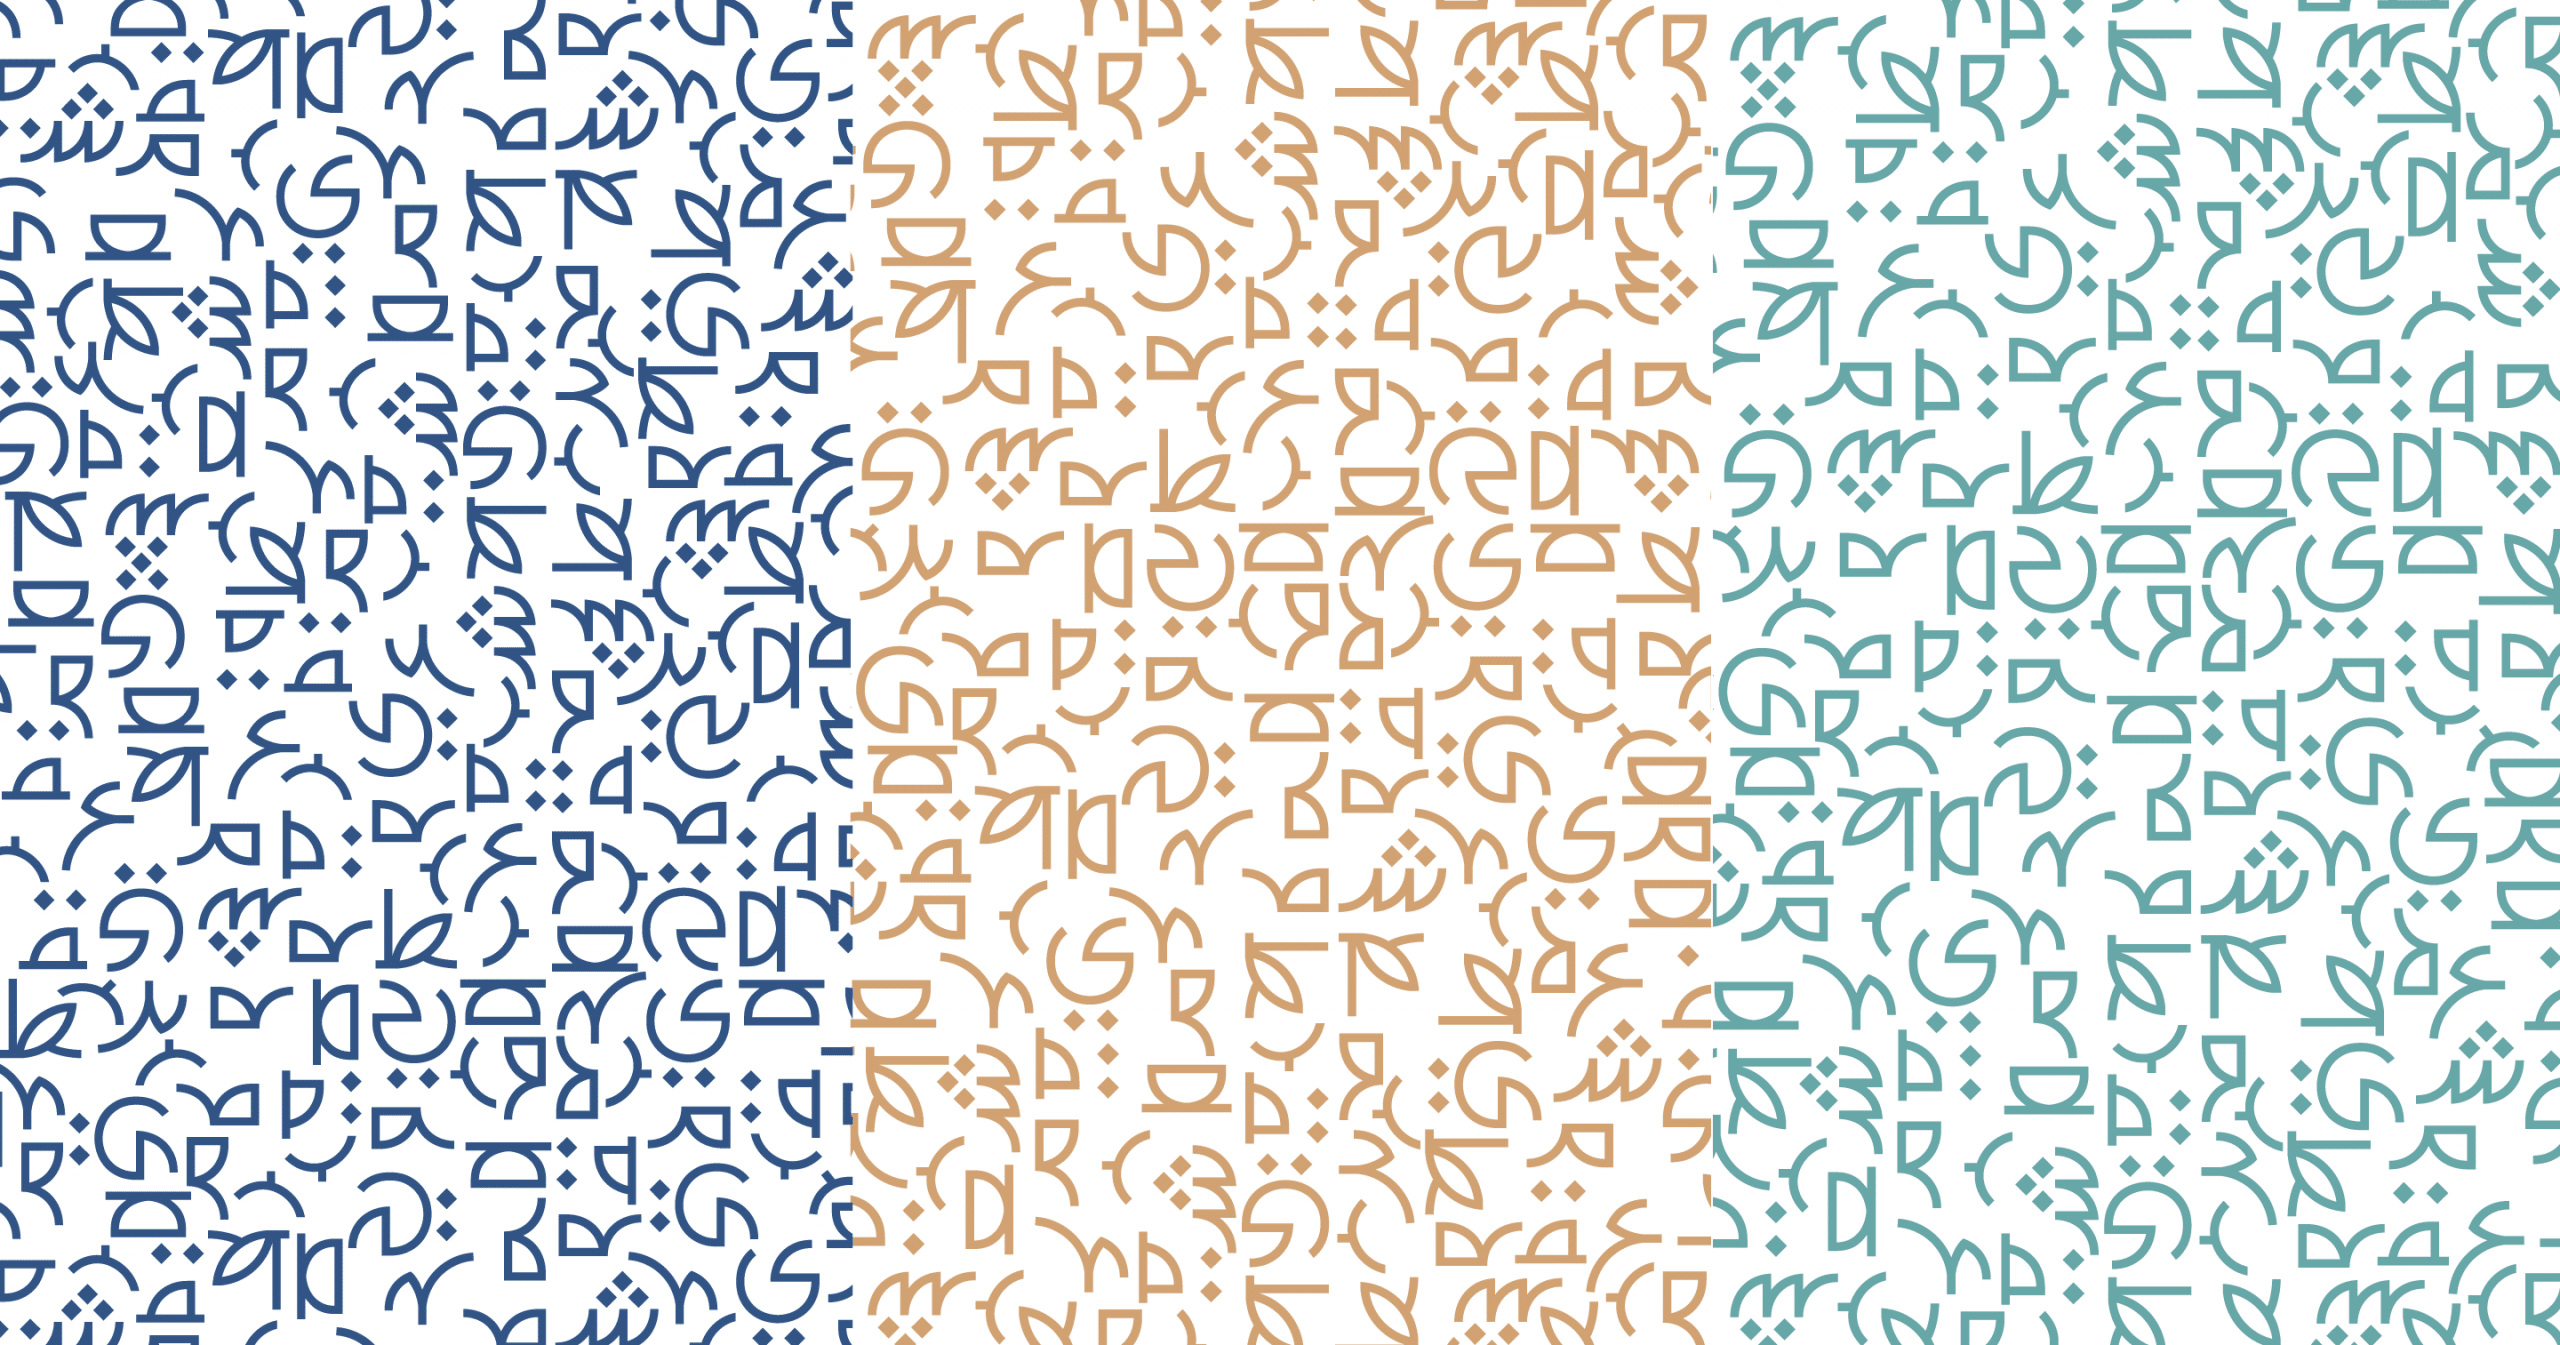 Stanza Coffee brand patterns from Arabic letters